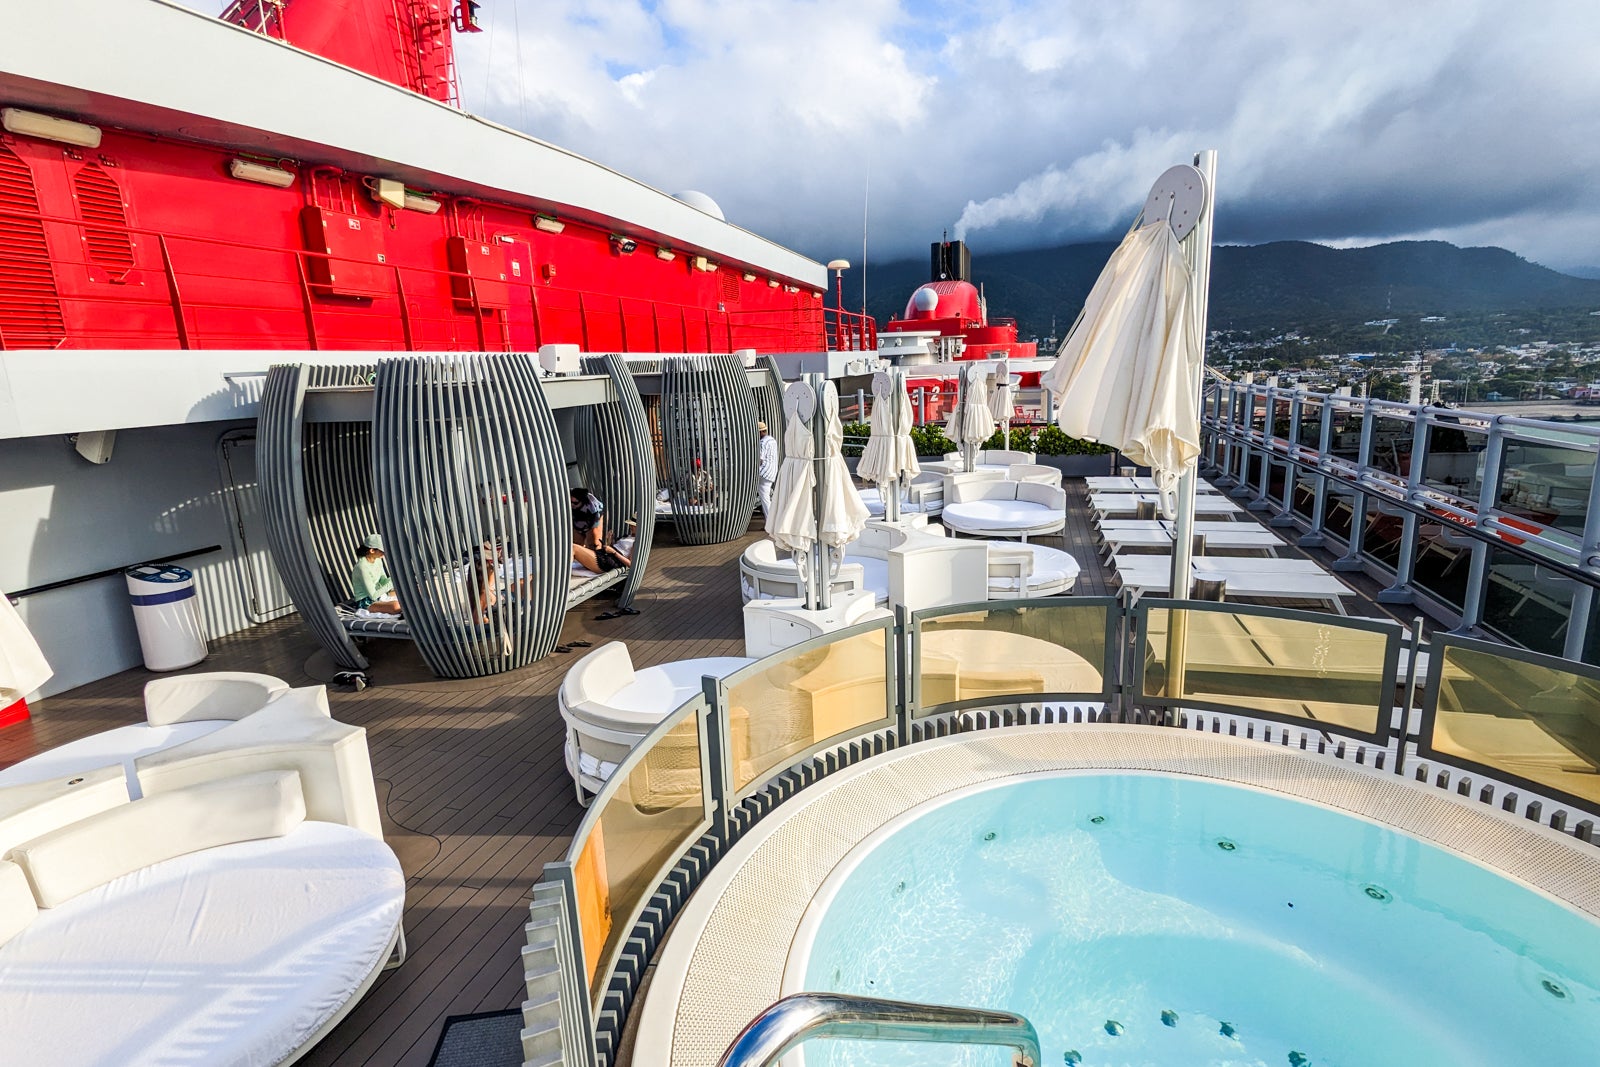 VIP cruise ship pool deck with hot tubs and white day beds.